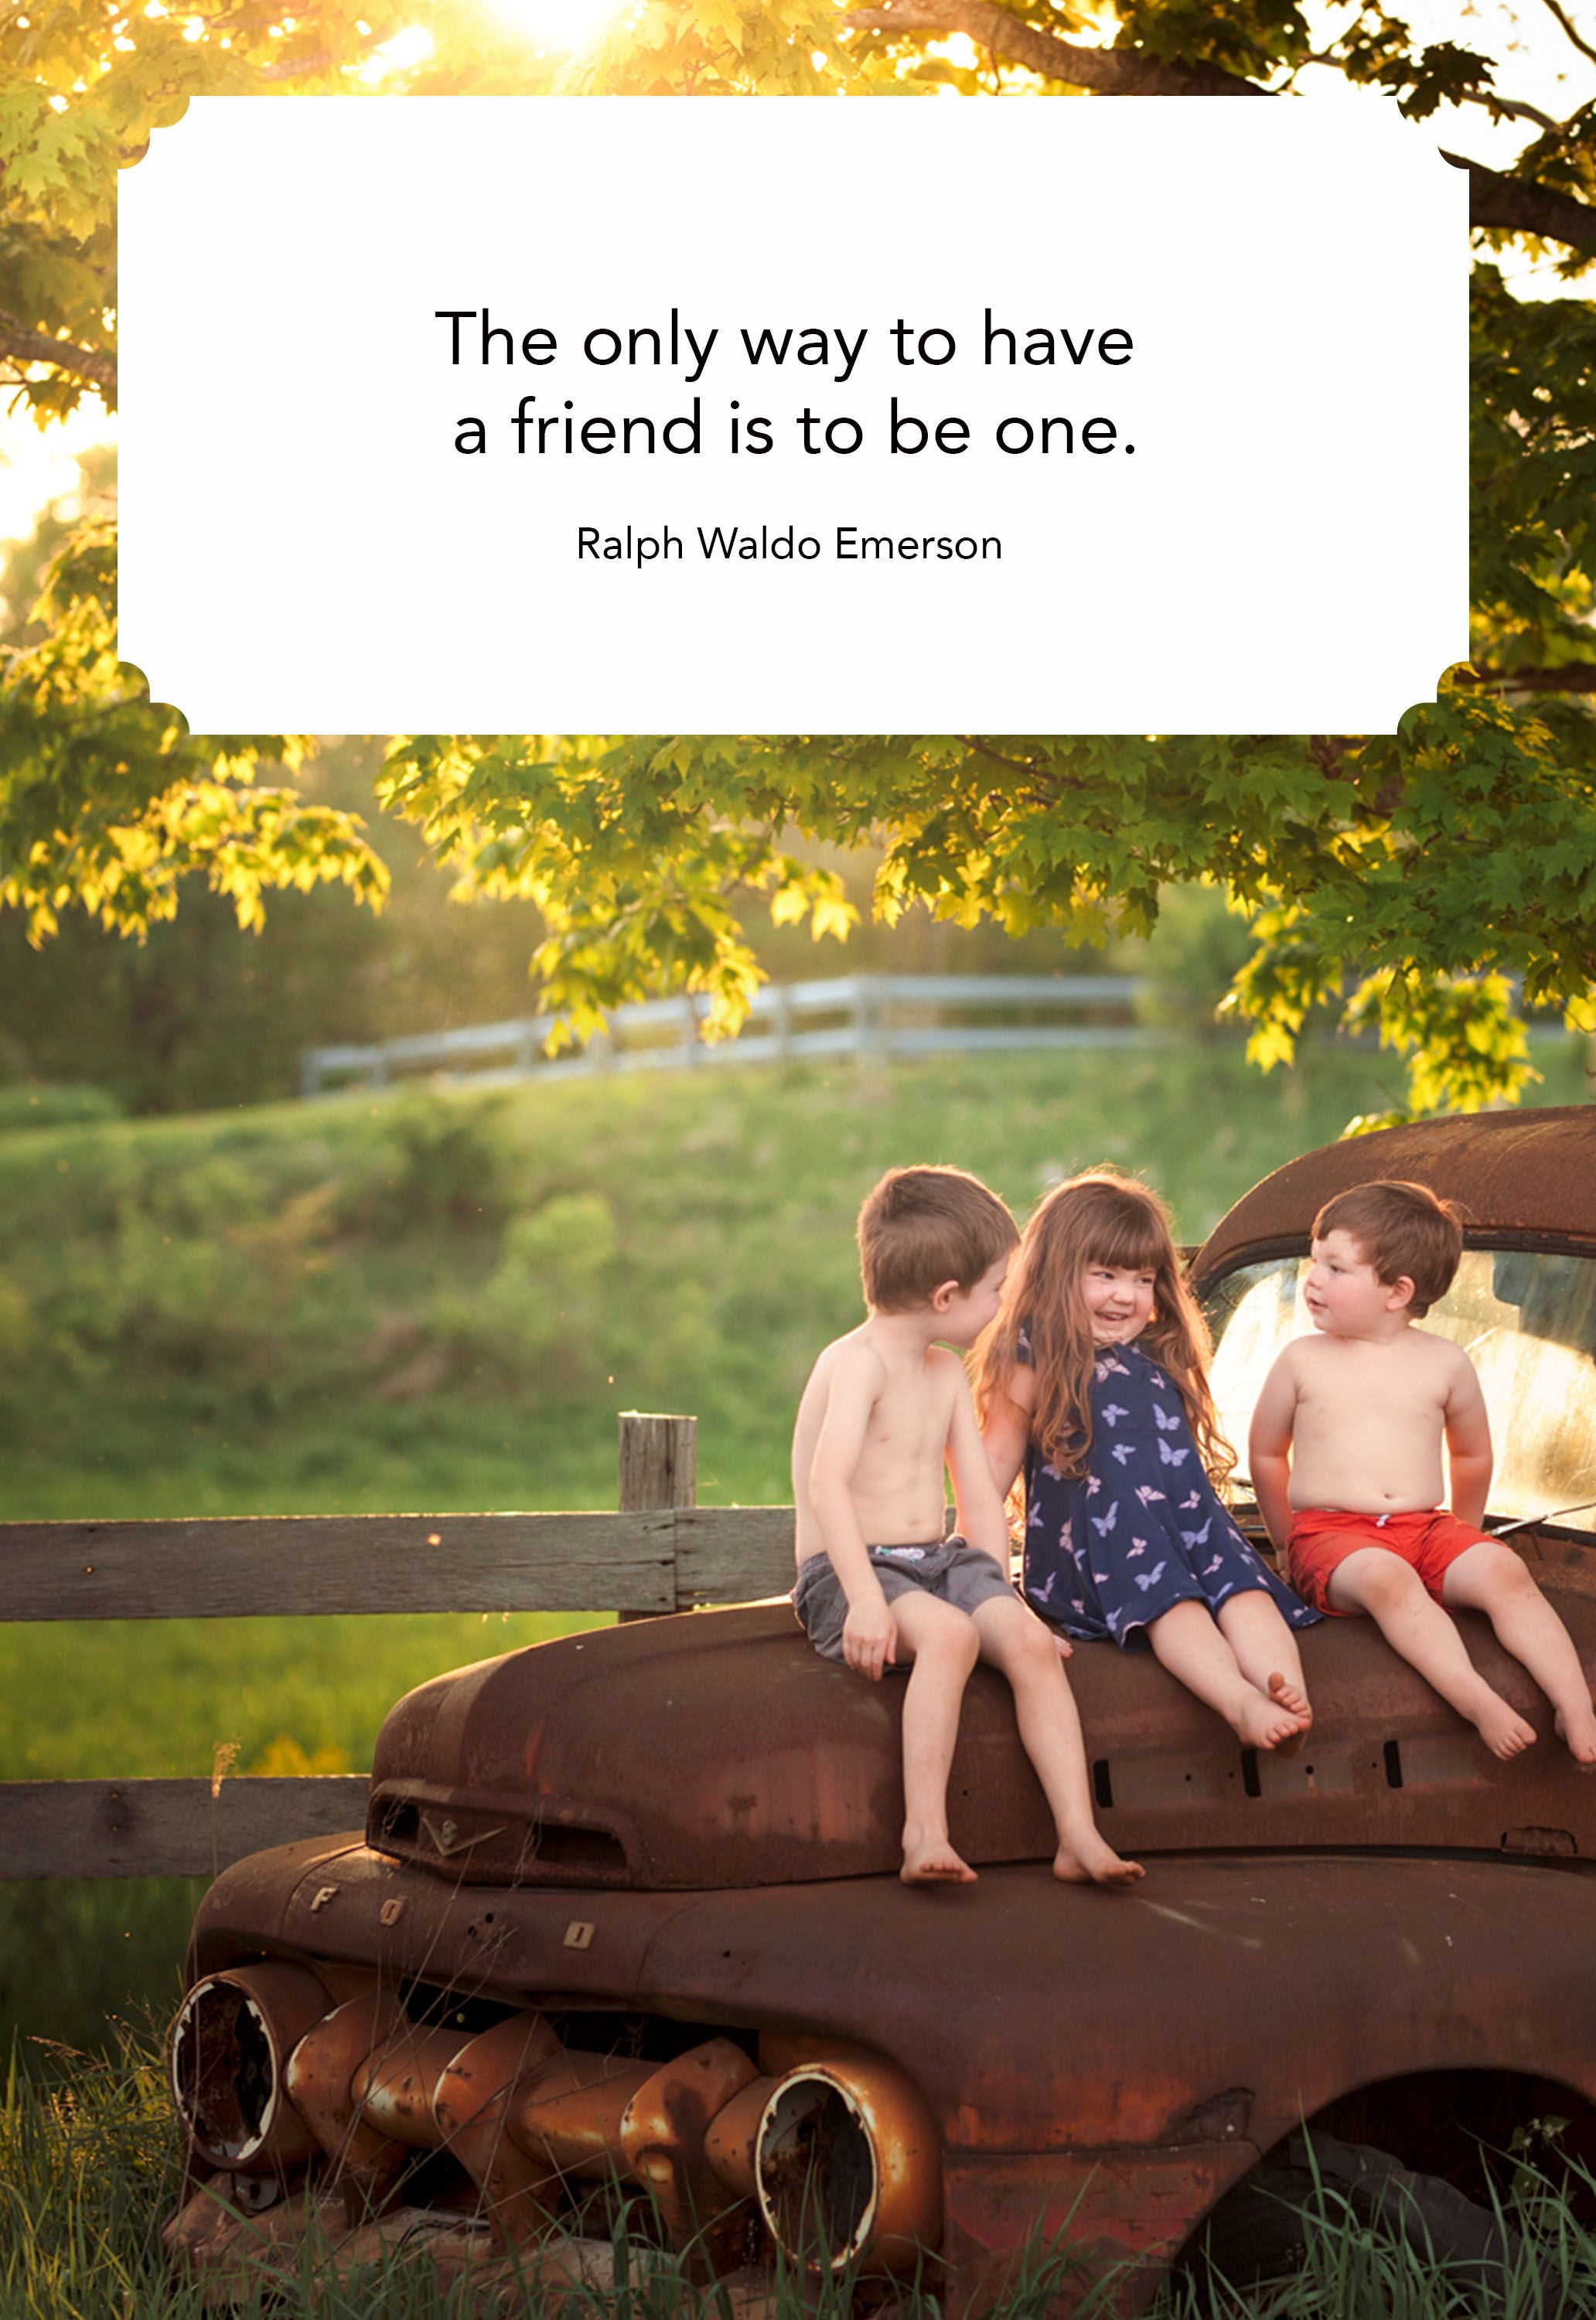 quotes on friendship and love